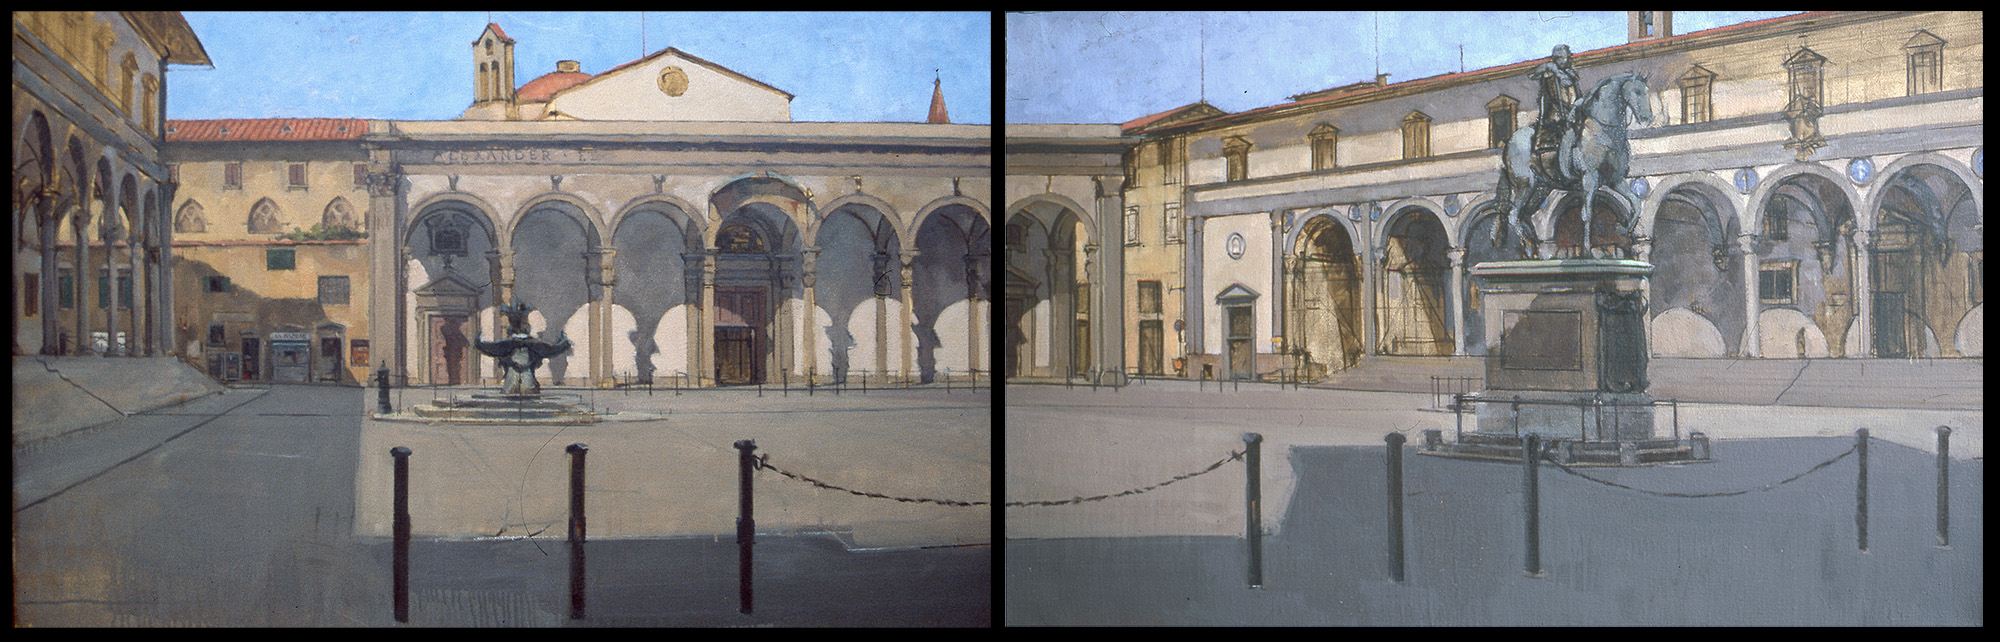 Piazza SS. Annunziata, Florence by Frederick Ortner (larger)